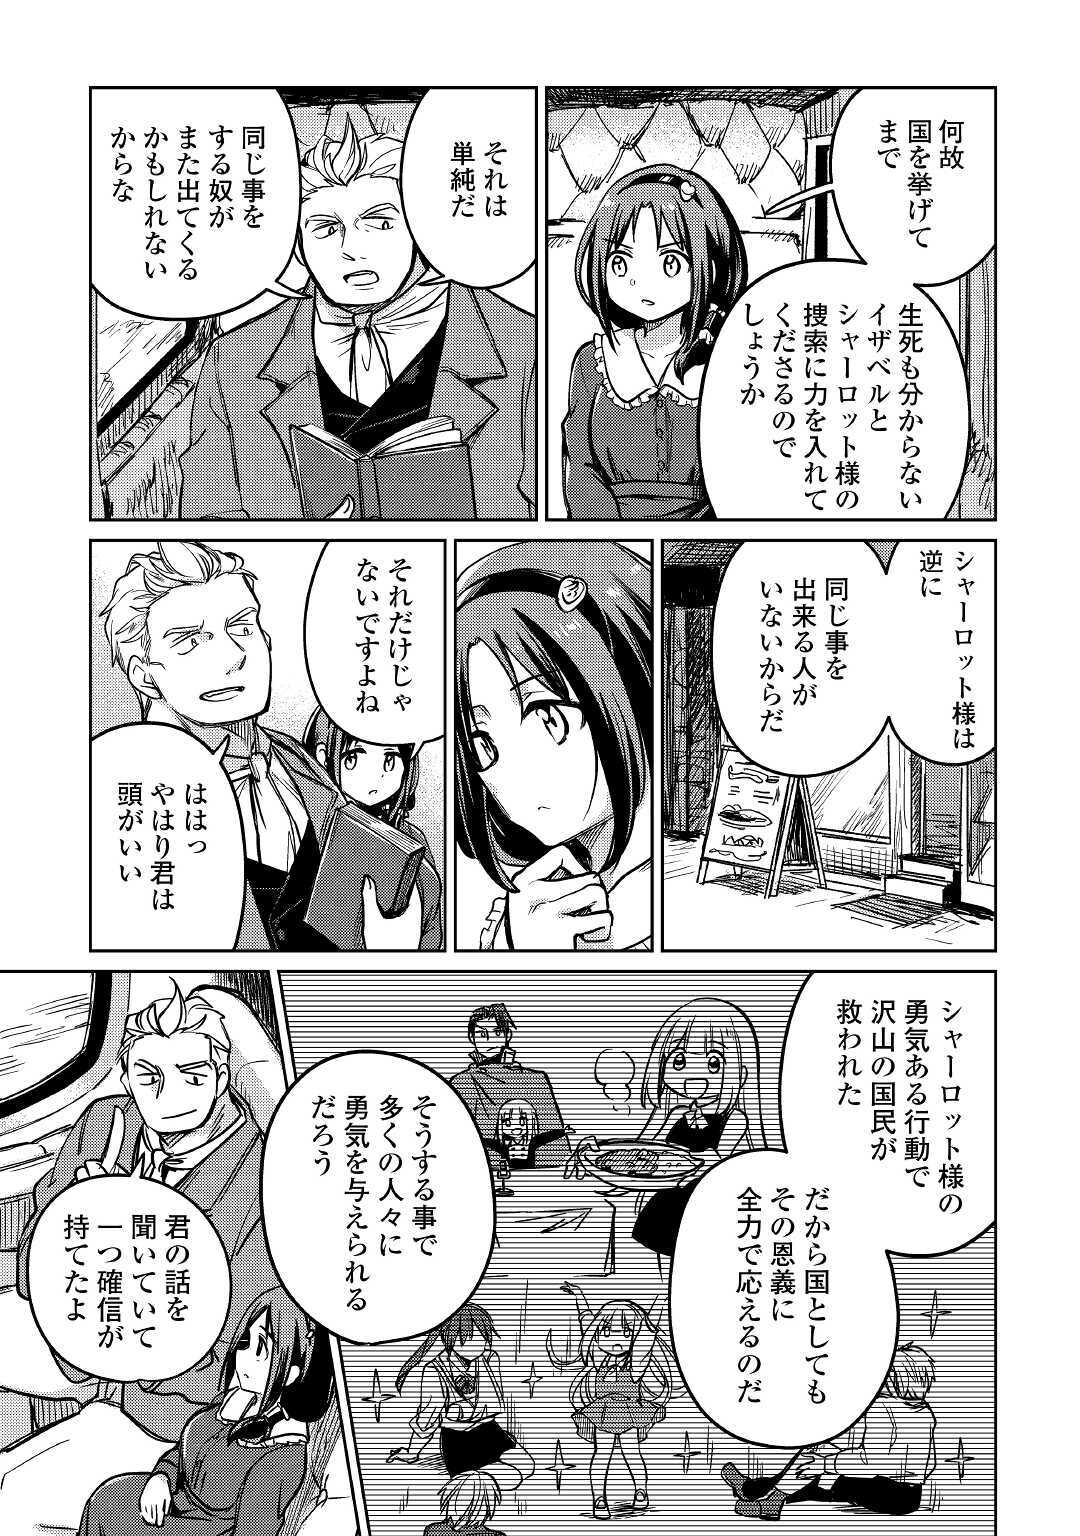 The Former Structural Researcher’s Story of Otherworldly Adventure 第28話 - Page 13